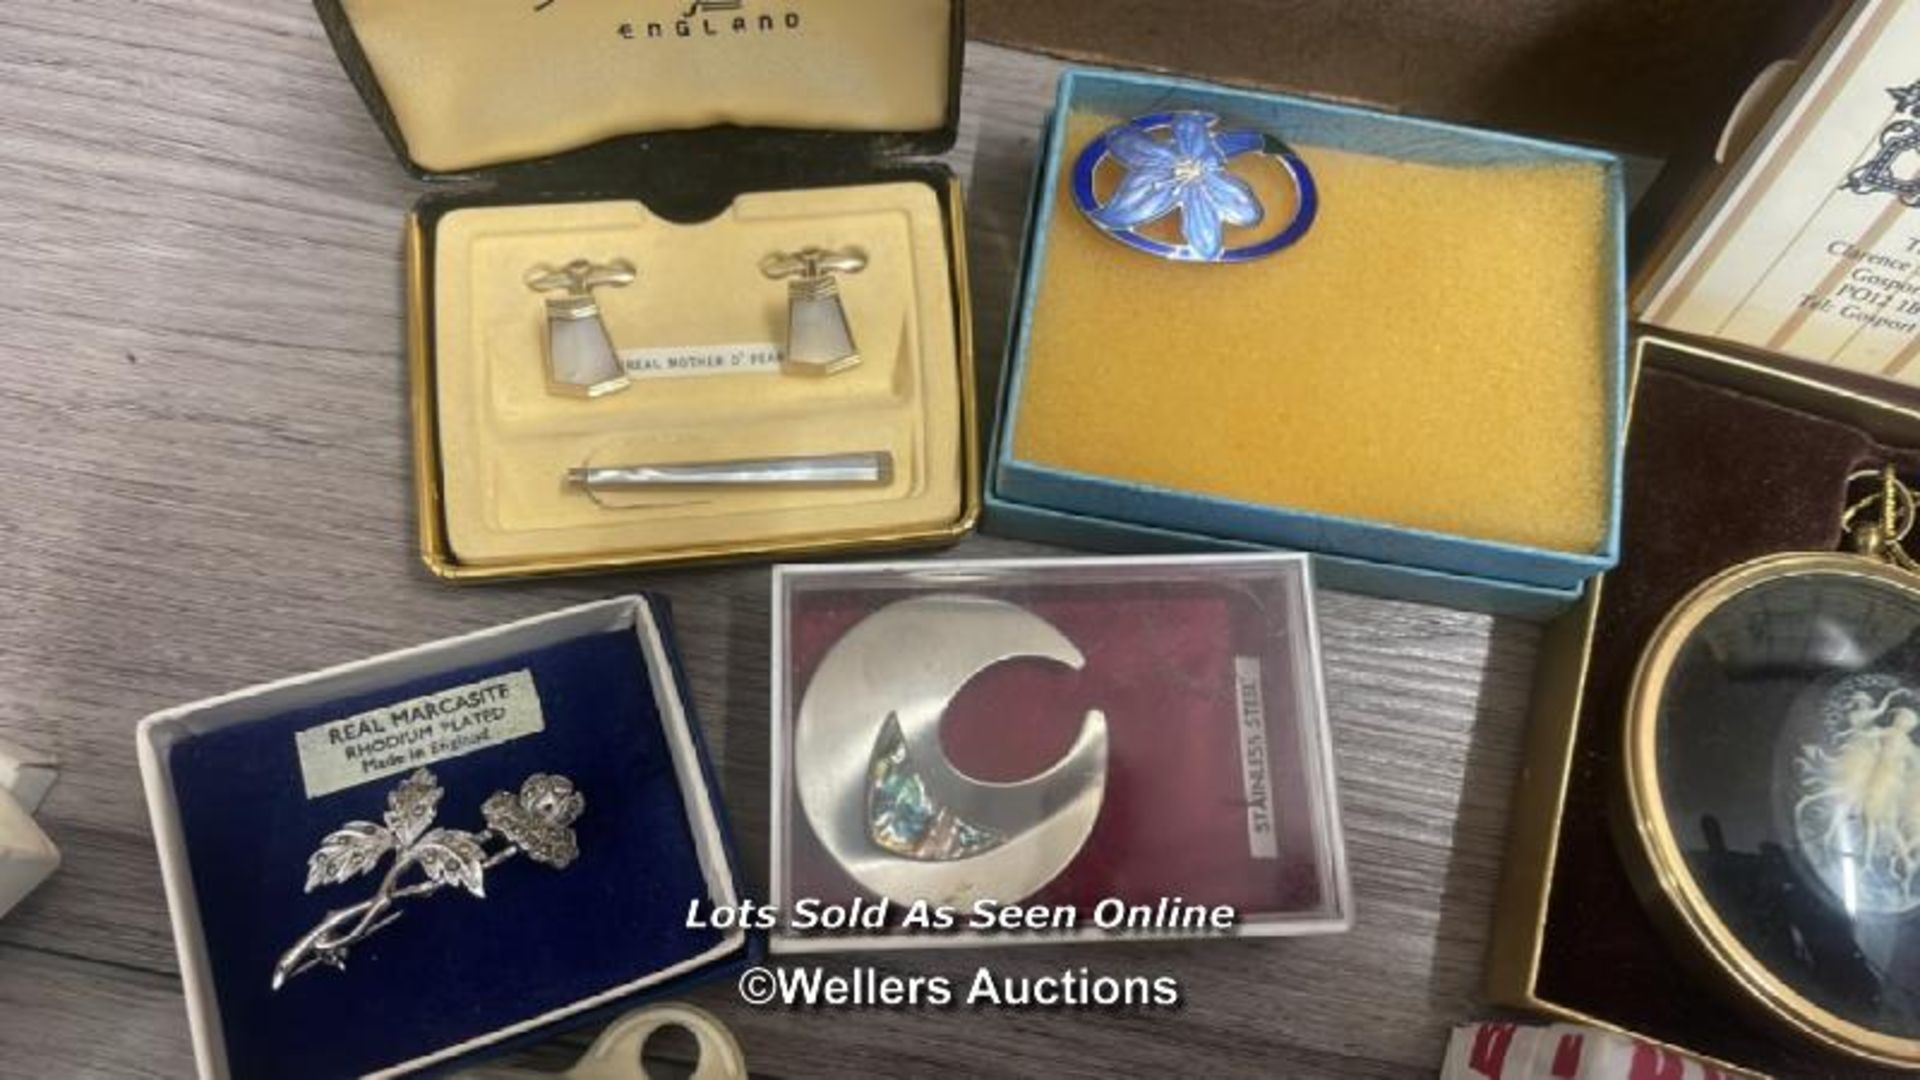 A LARGE QUANTITY OF COSTUME JEWELLERY, COMPACTS AND WATCHES - Image 9 of 12